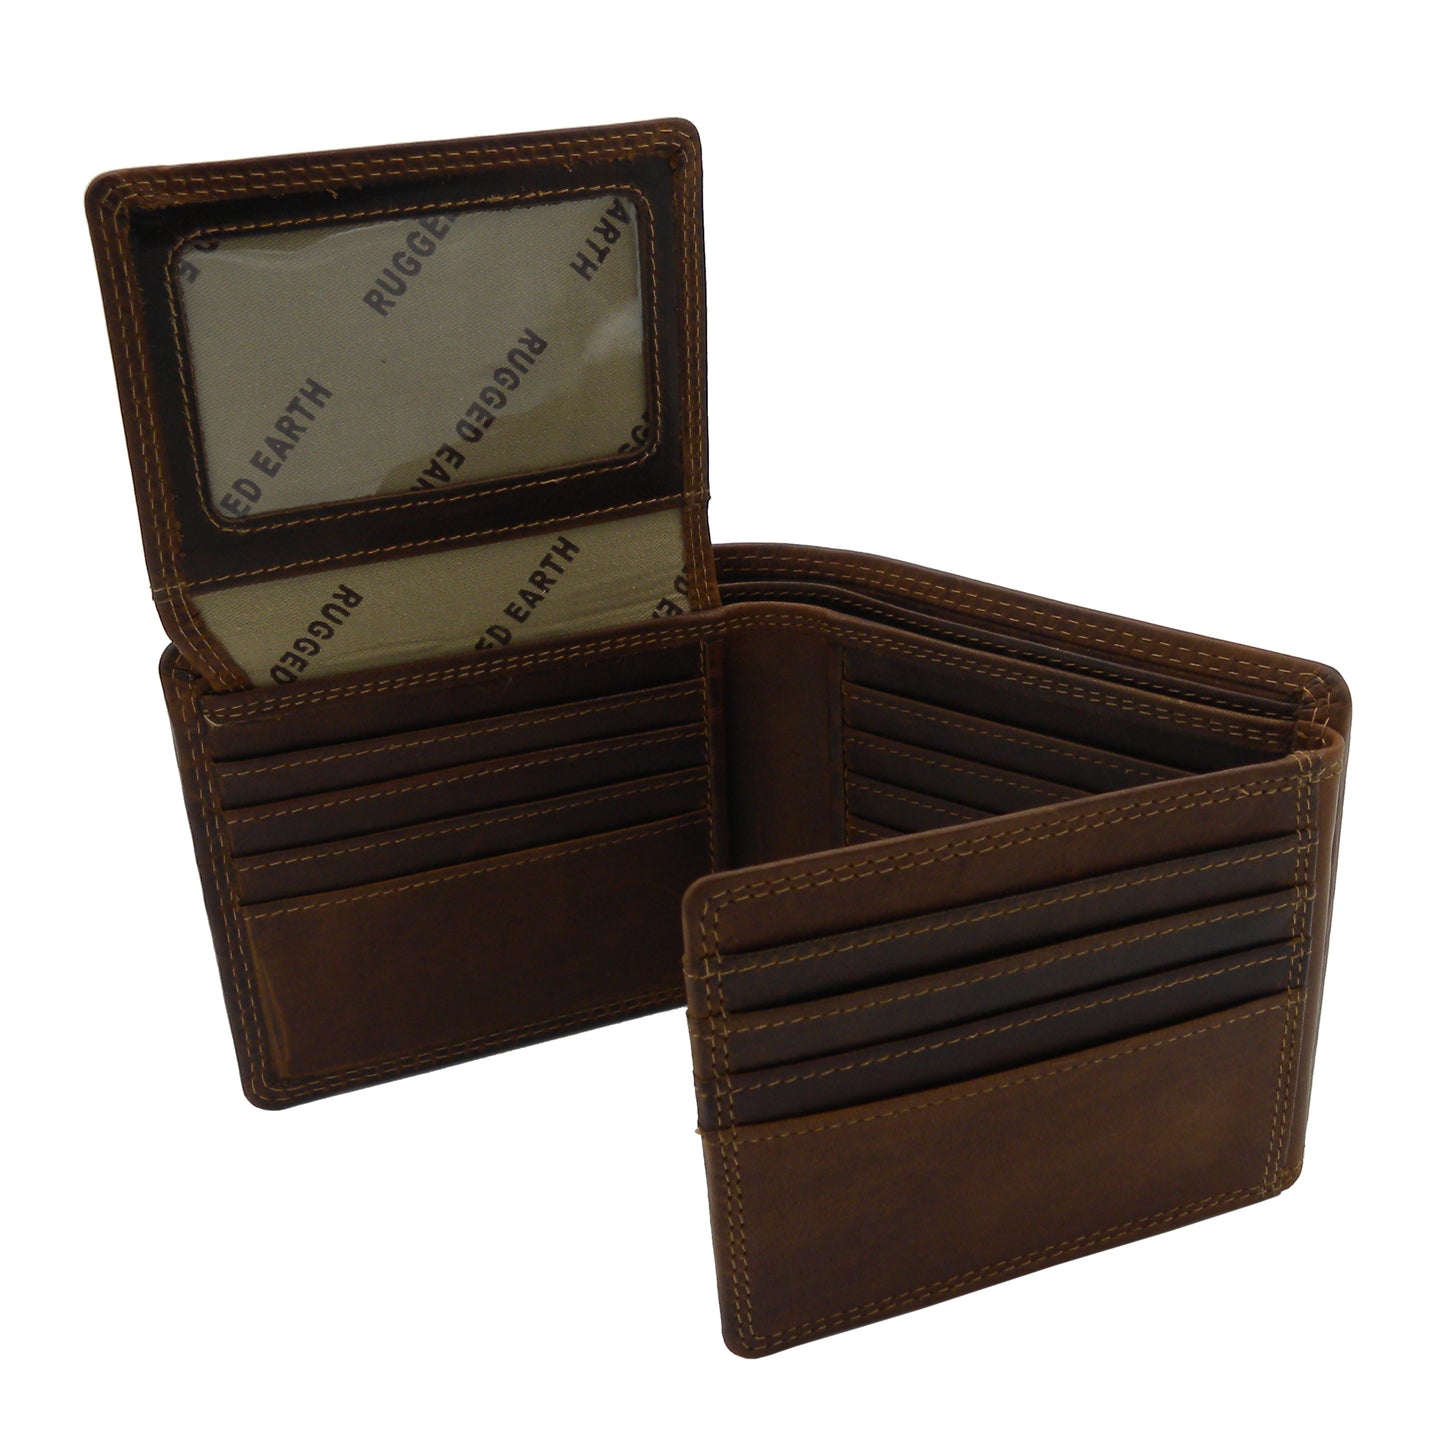 RE Leather Wallet - Bifold with Top & Mid Flap